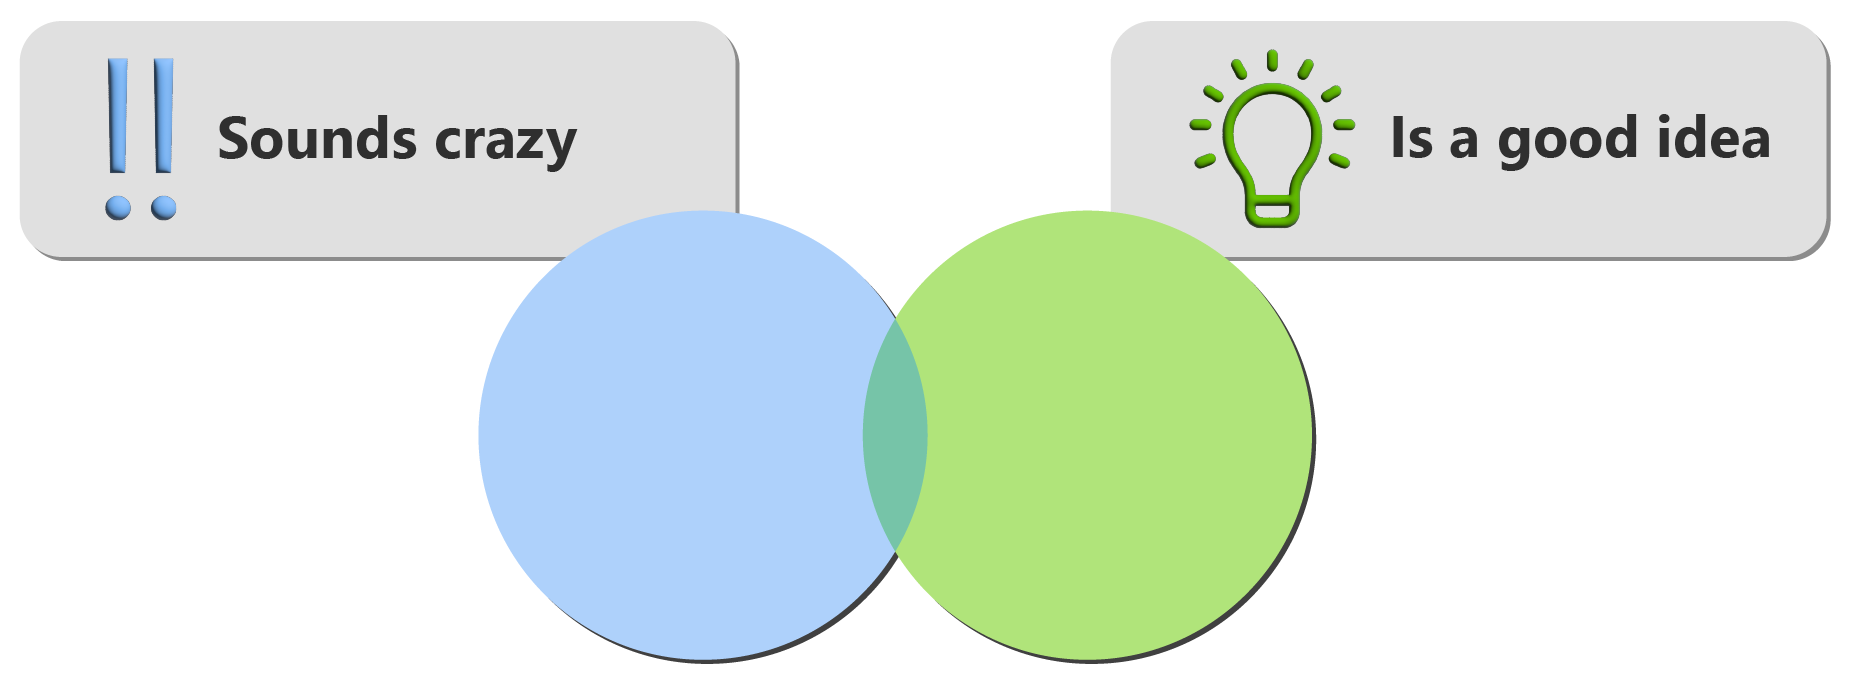 Diagram that shows two slightly overlapping circles, one for good ideas, and the other for absurd-sounding ideas.